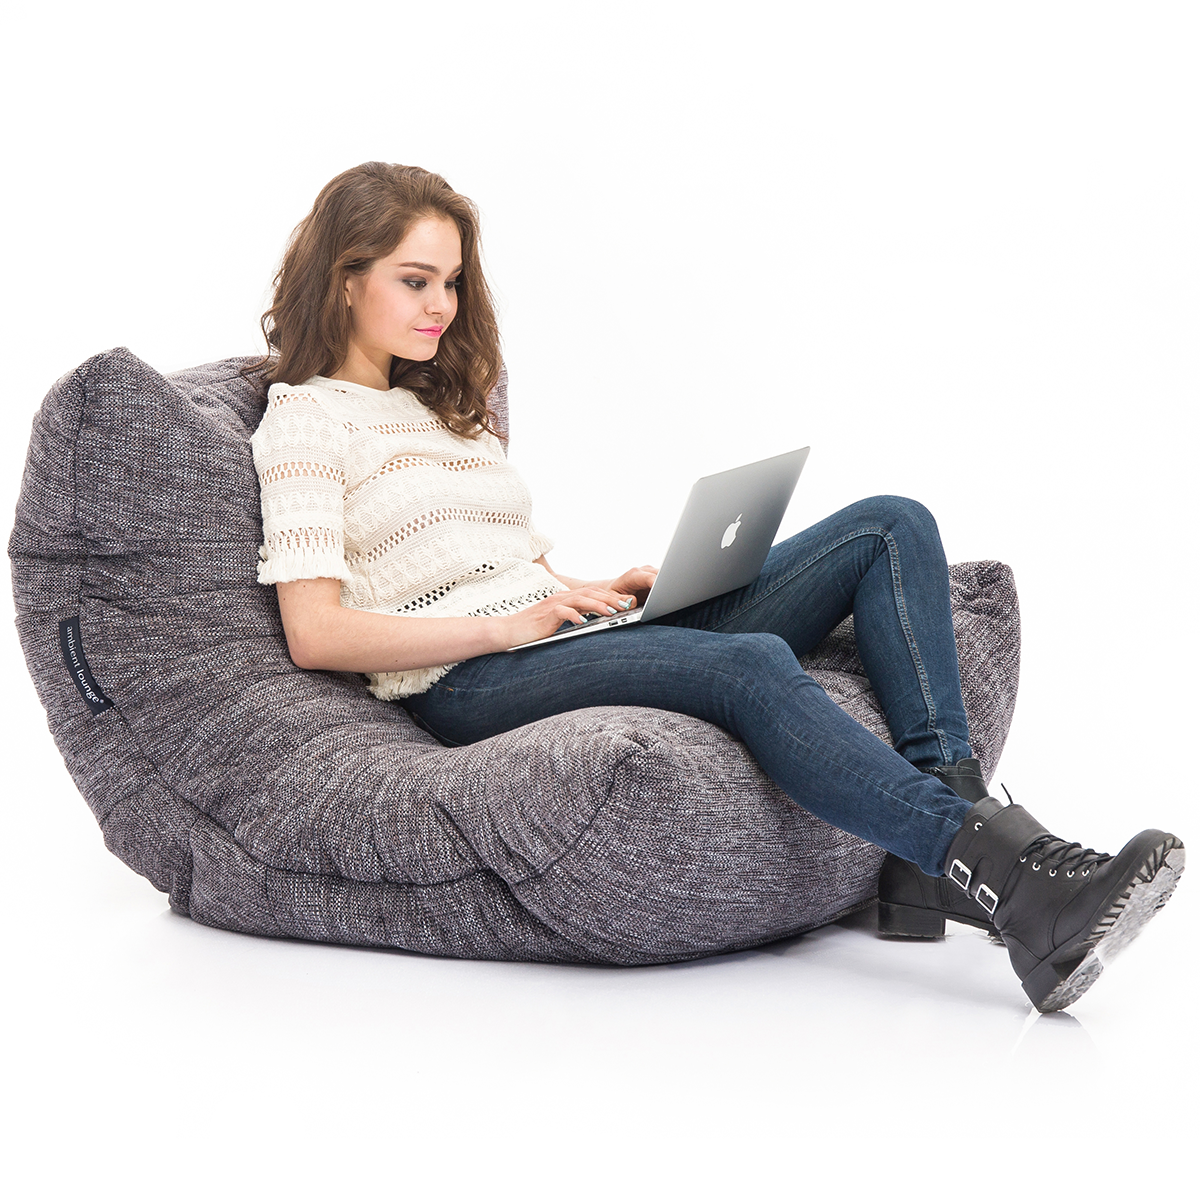 Acoustic Sofa in Luscious Grey for Working and Reading